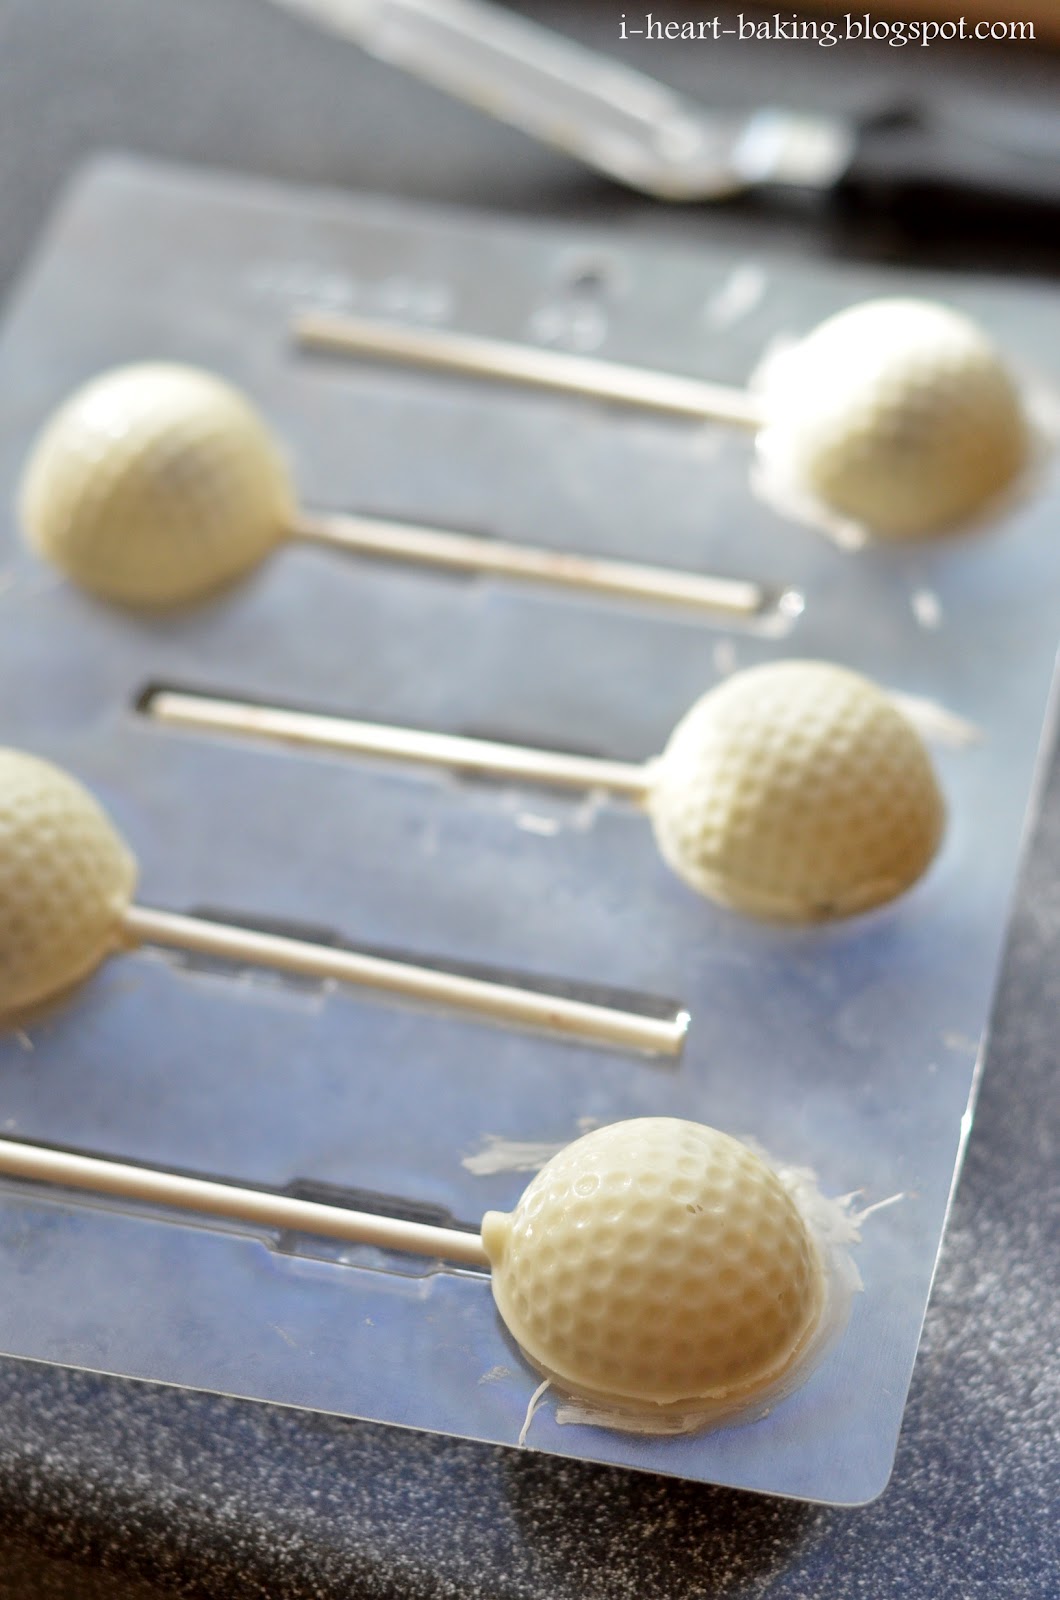 C'mon and make these golf ball cake pops with me. The first step